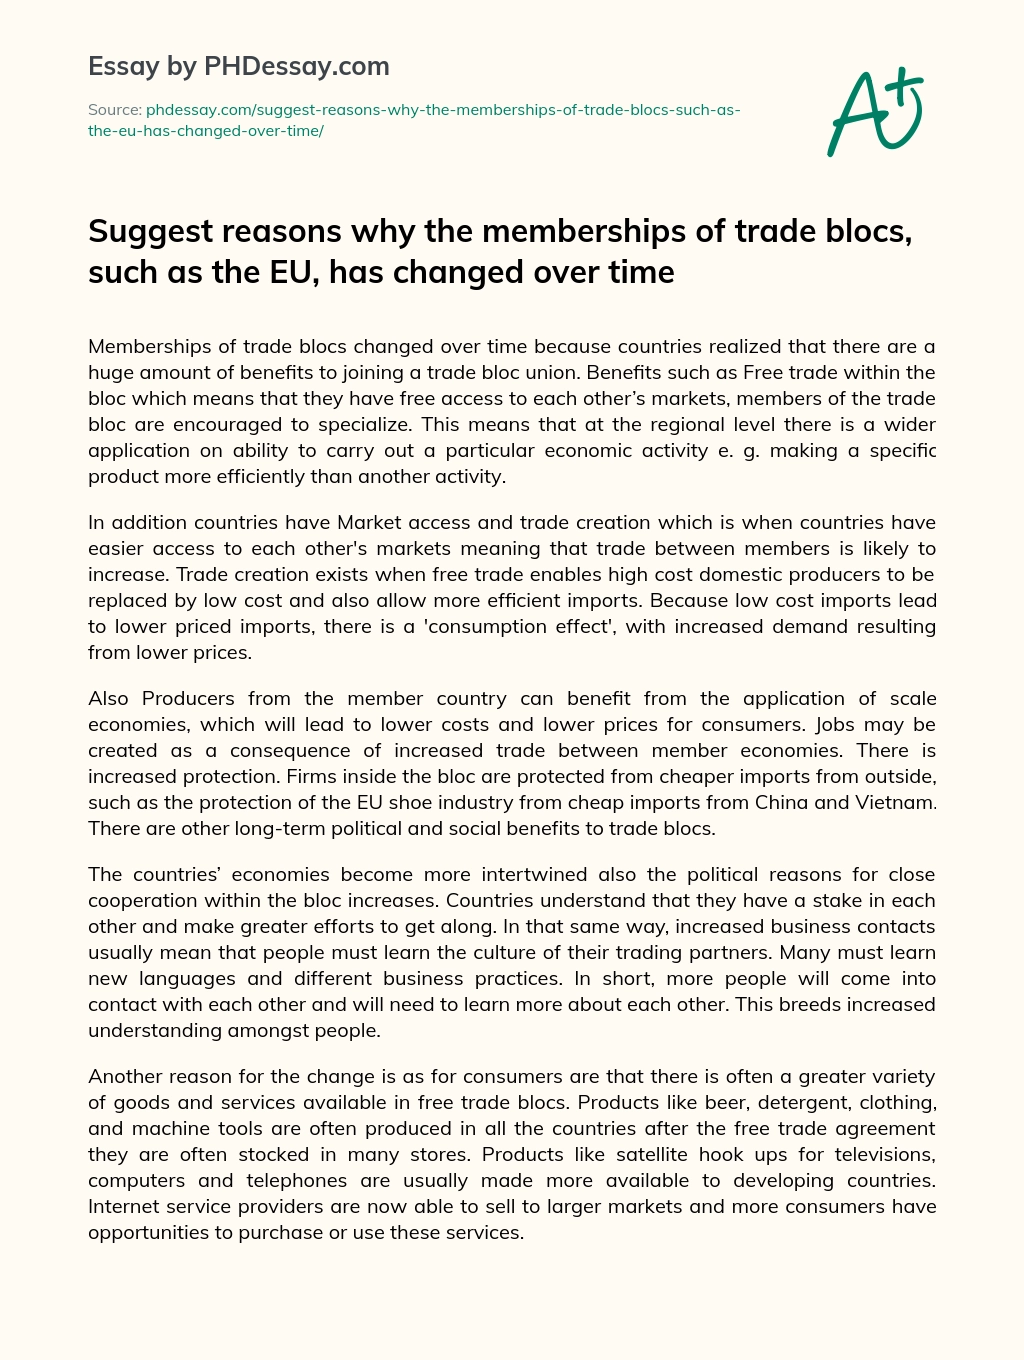 The Benefits of Joining a Trade Bloc Union essay